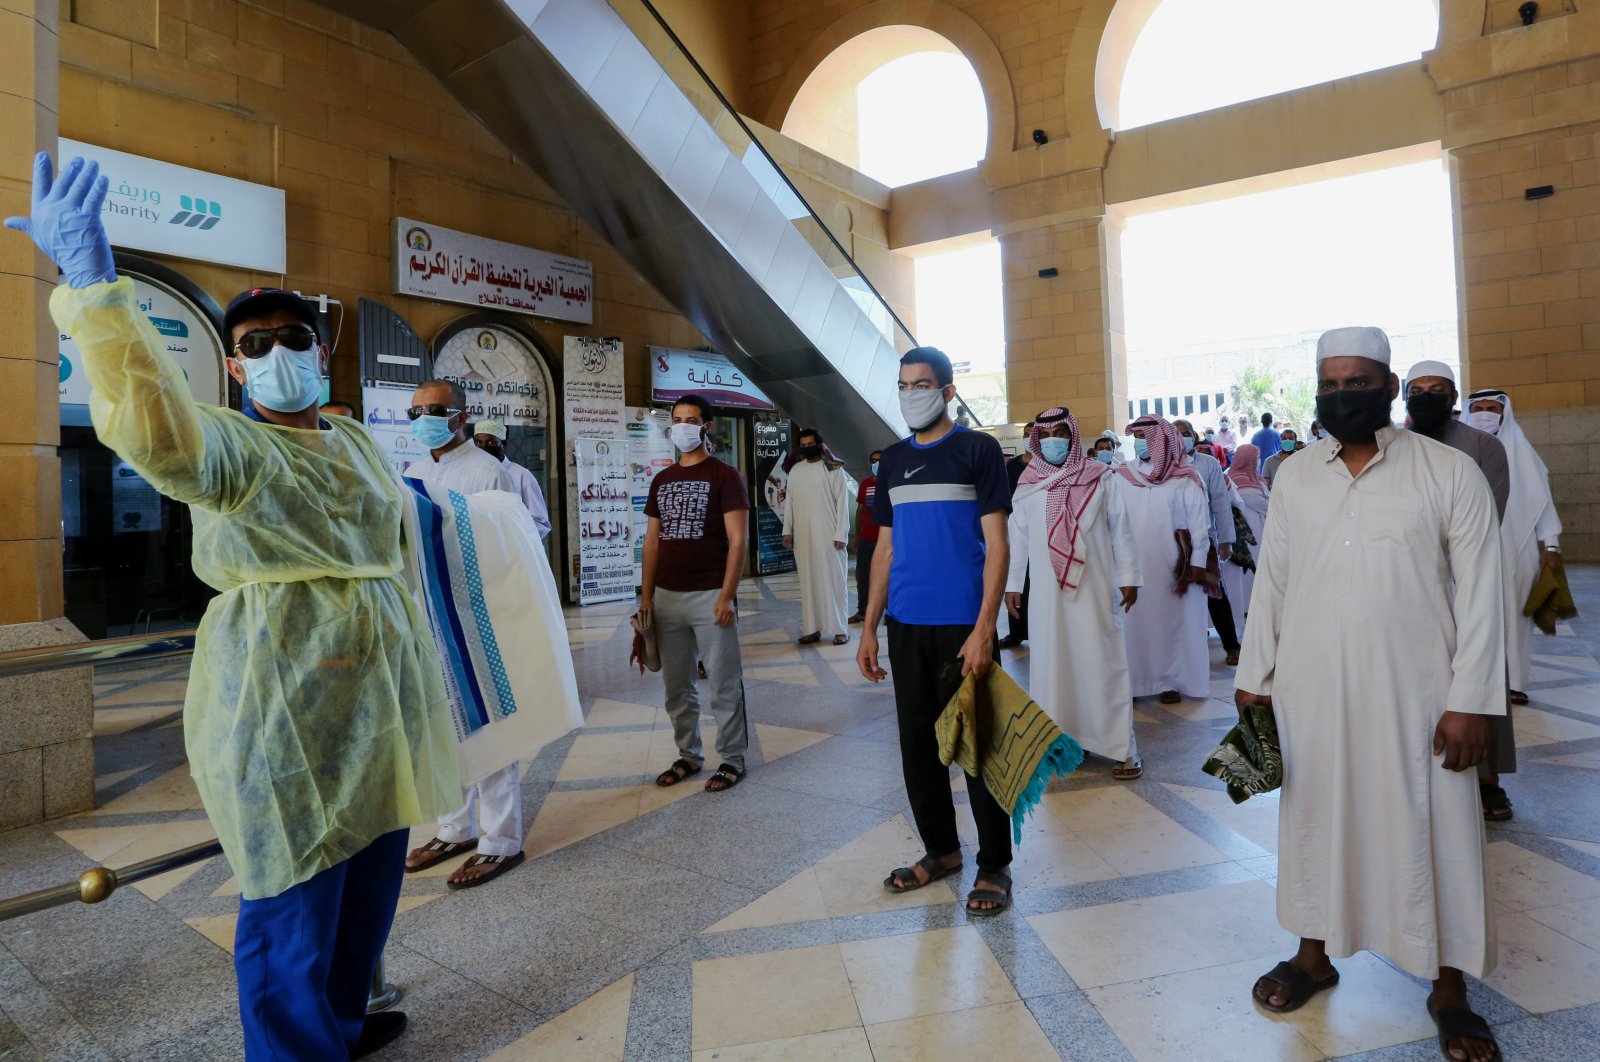 A security worker checks worshipers before they perform Friday prayers inside the Al-Rajhi Mosque, Riyadh, Saudi Arabia, June 5, 2020. (Reuters Photo)